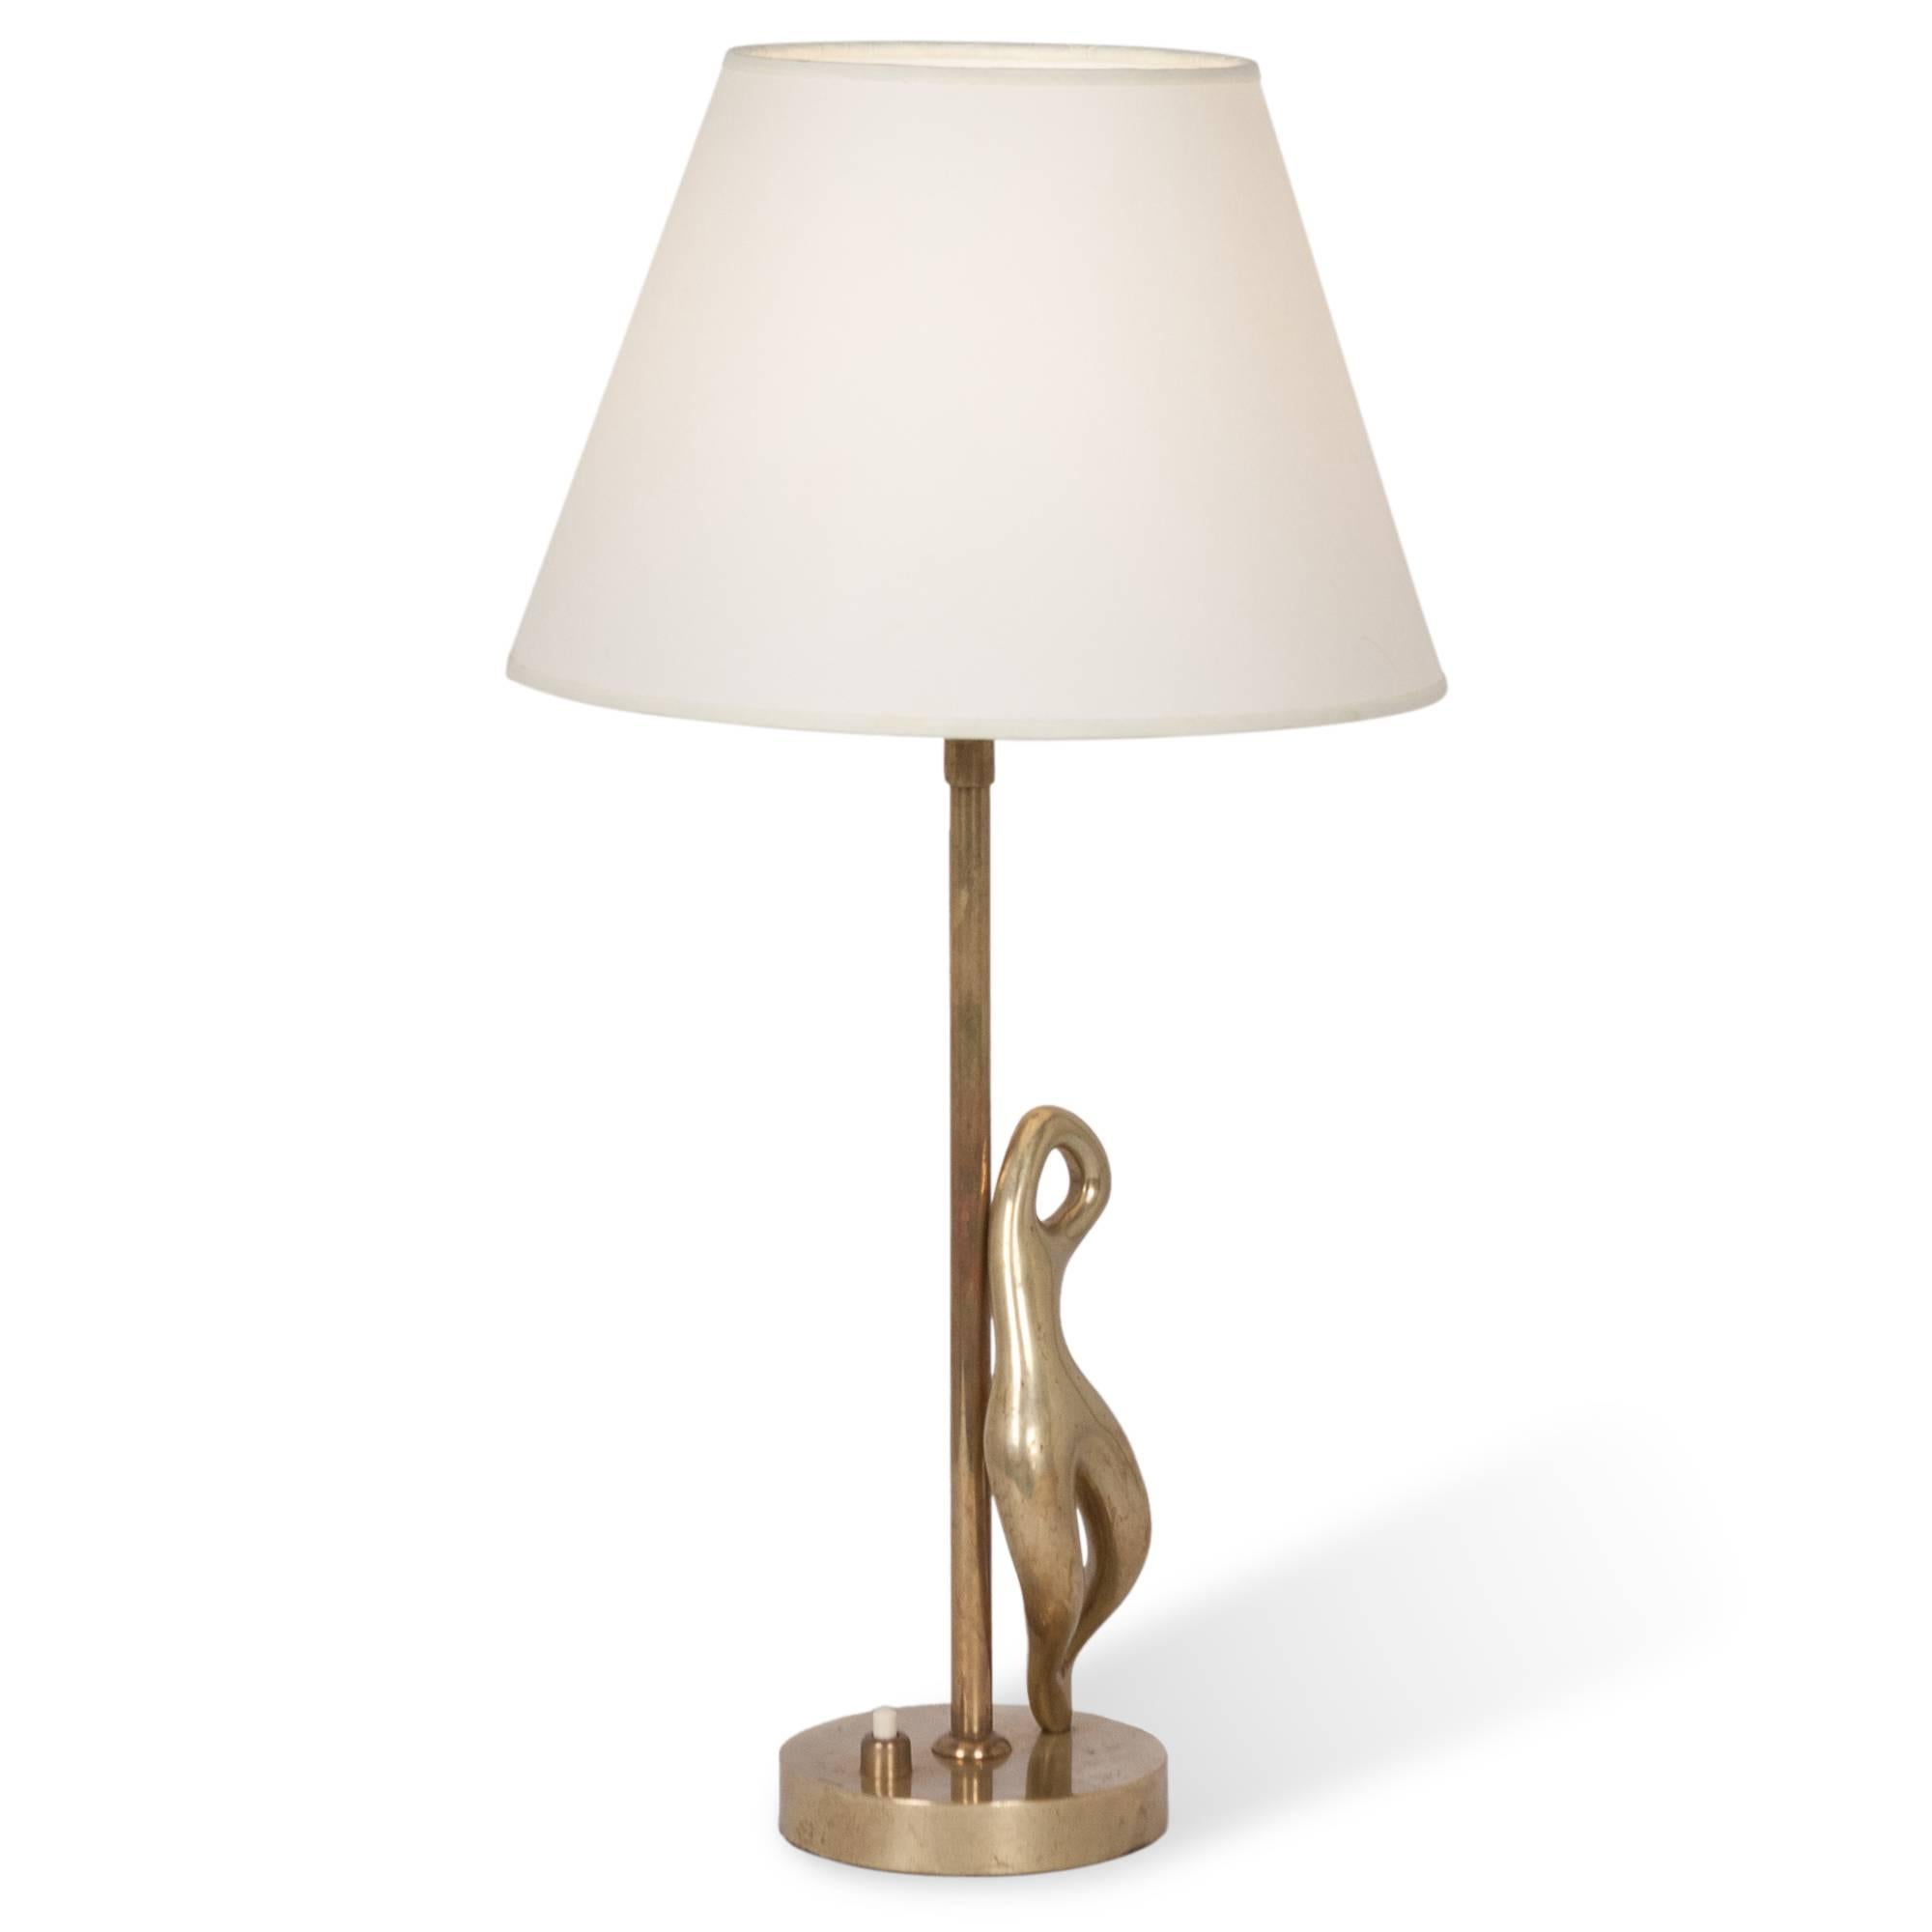 Mid-Century Modern Abstract Bronze Figure Table Lamp, 1950s, by Ricardo Scarpa For Sale